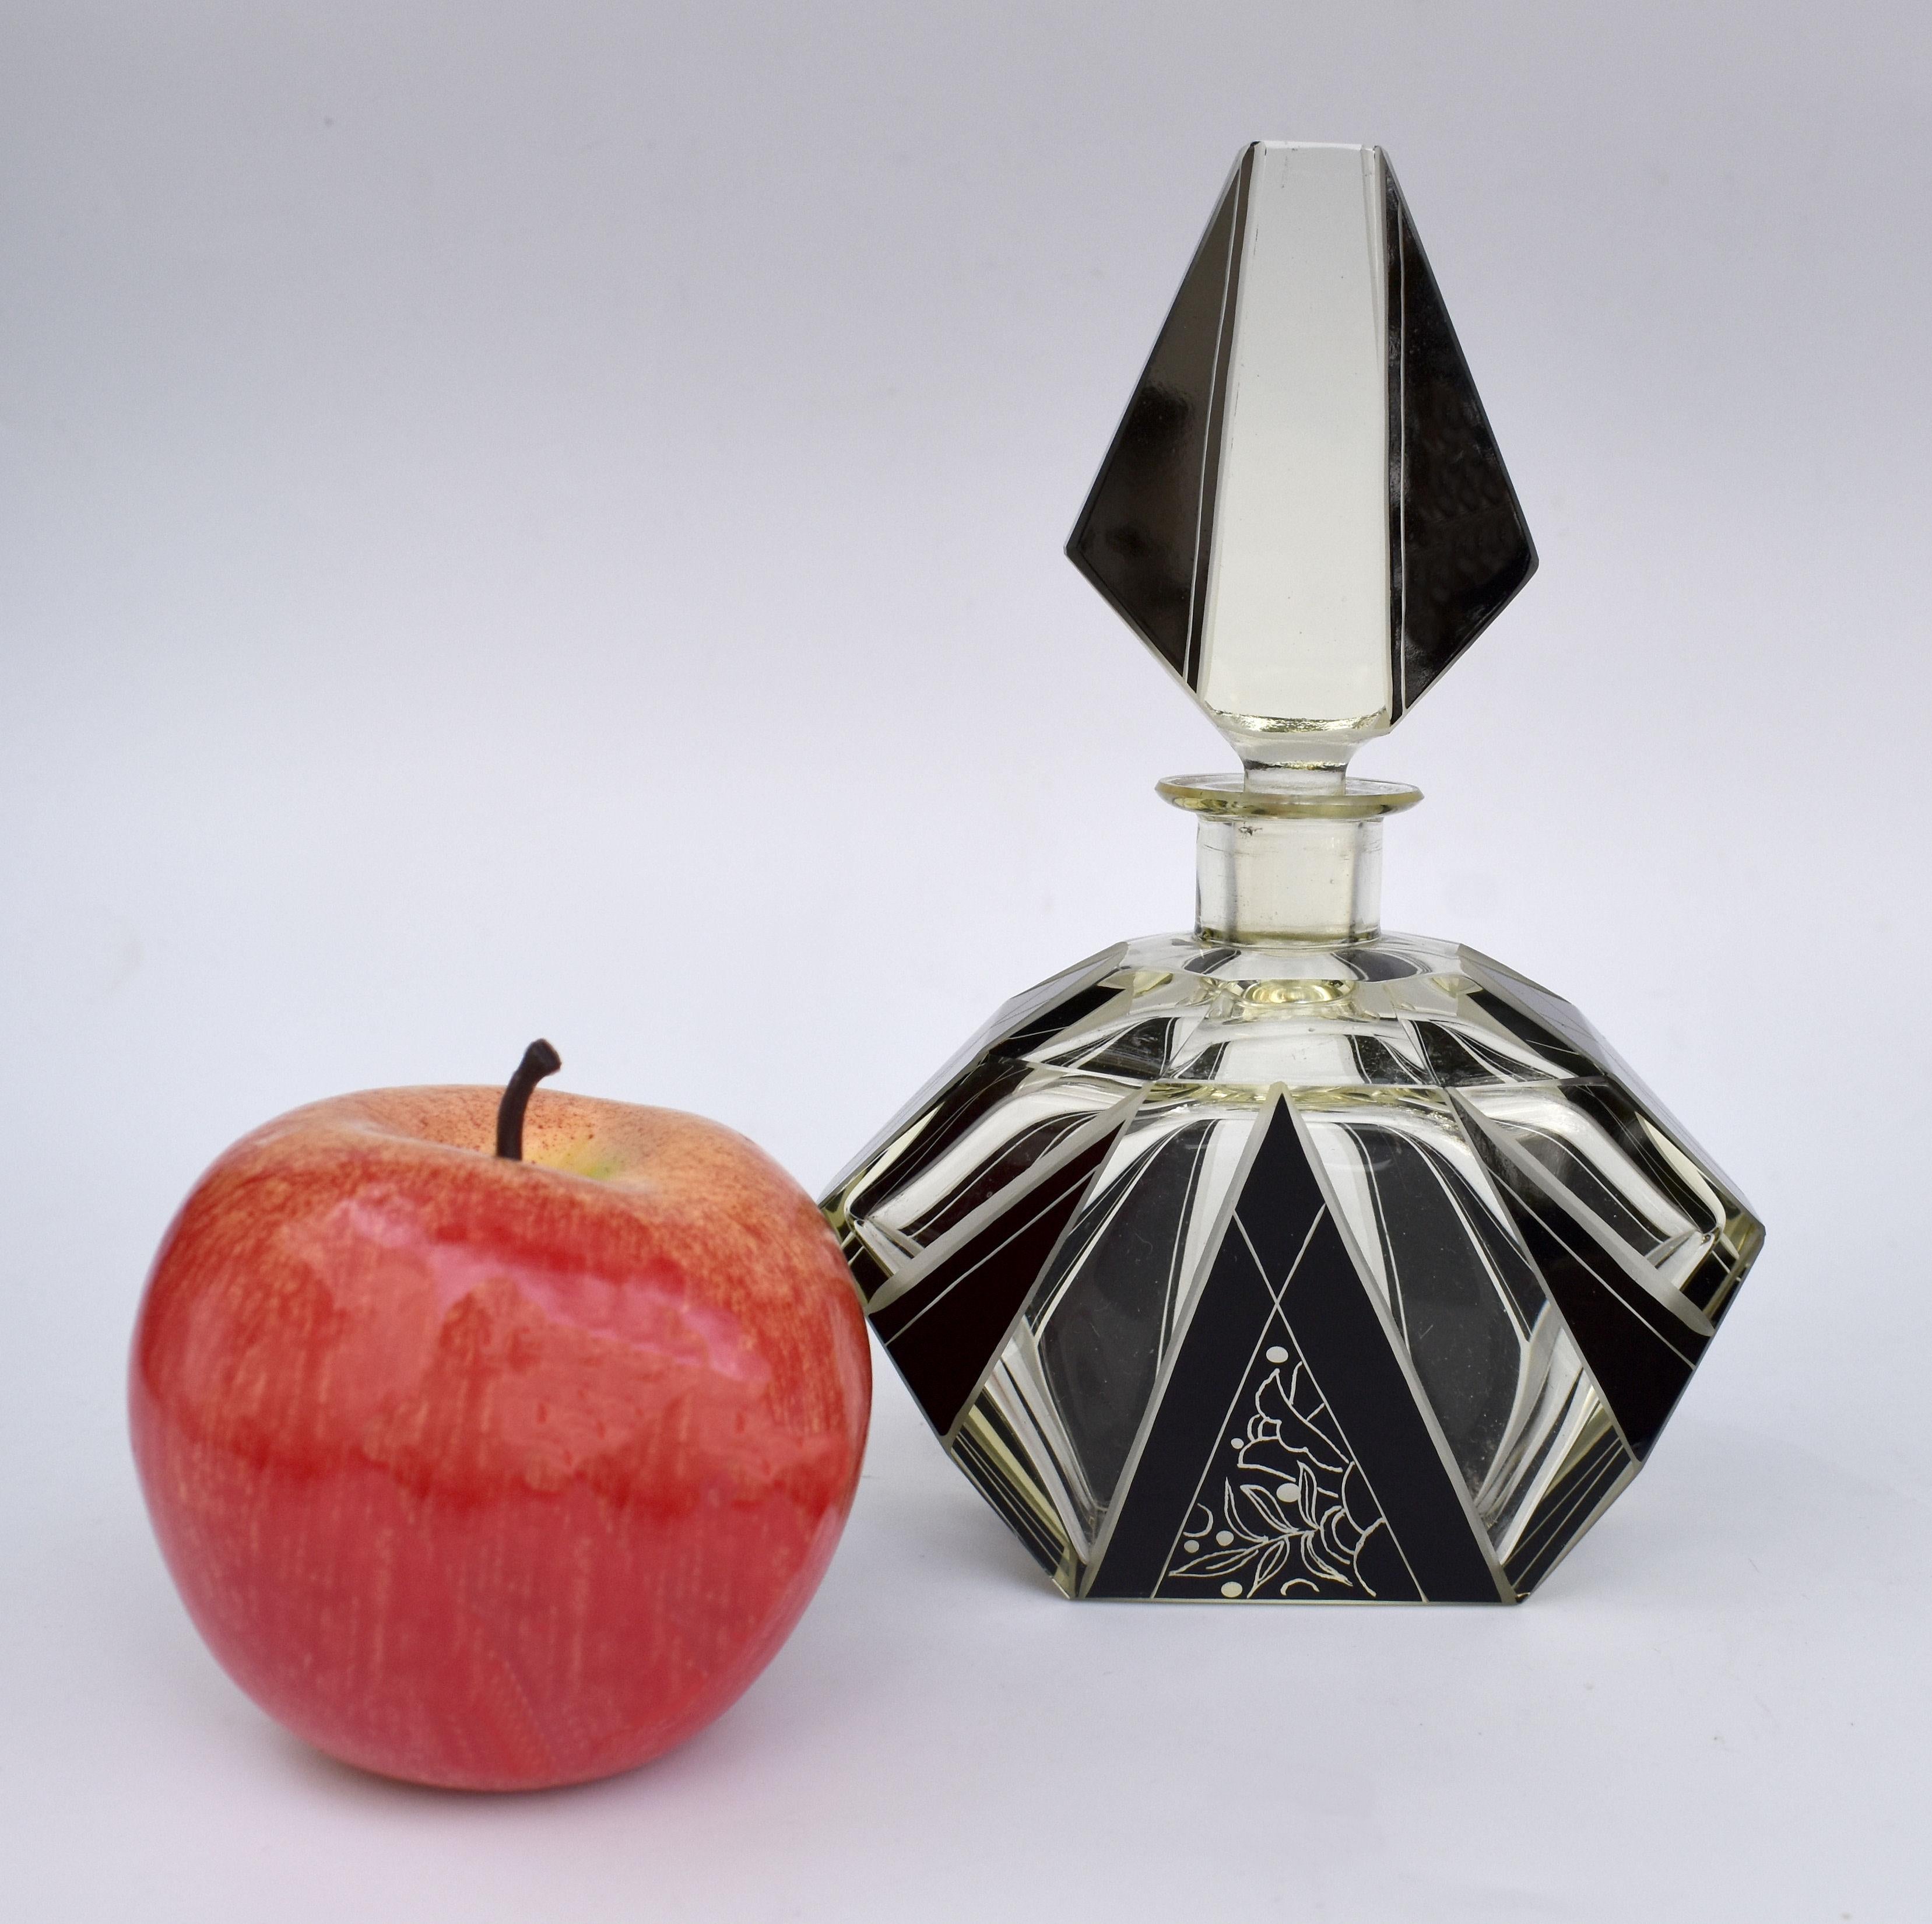 A truly beautiful Art Deco lemon glass scent bottle with a very attractive and iconic shape and patterning with geometric black enamel decoration to both the body of the bottle and stopper. Manufactured in Czech republic in the 1930s this stunning